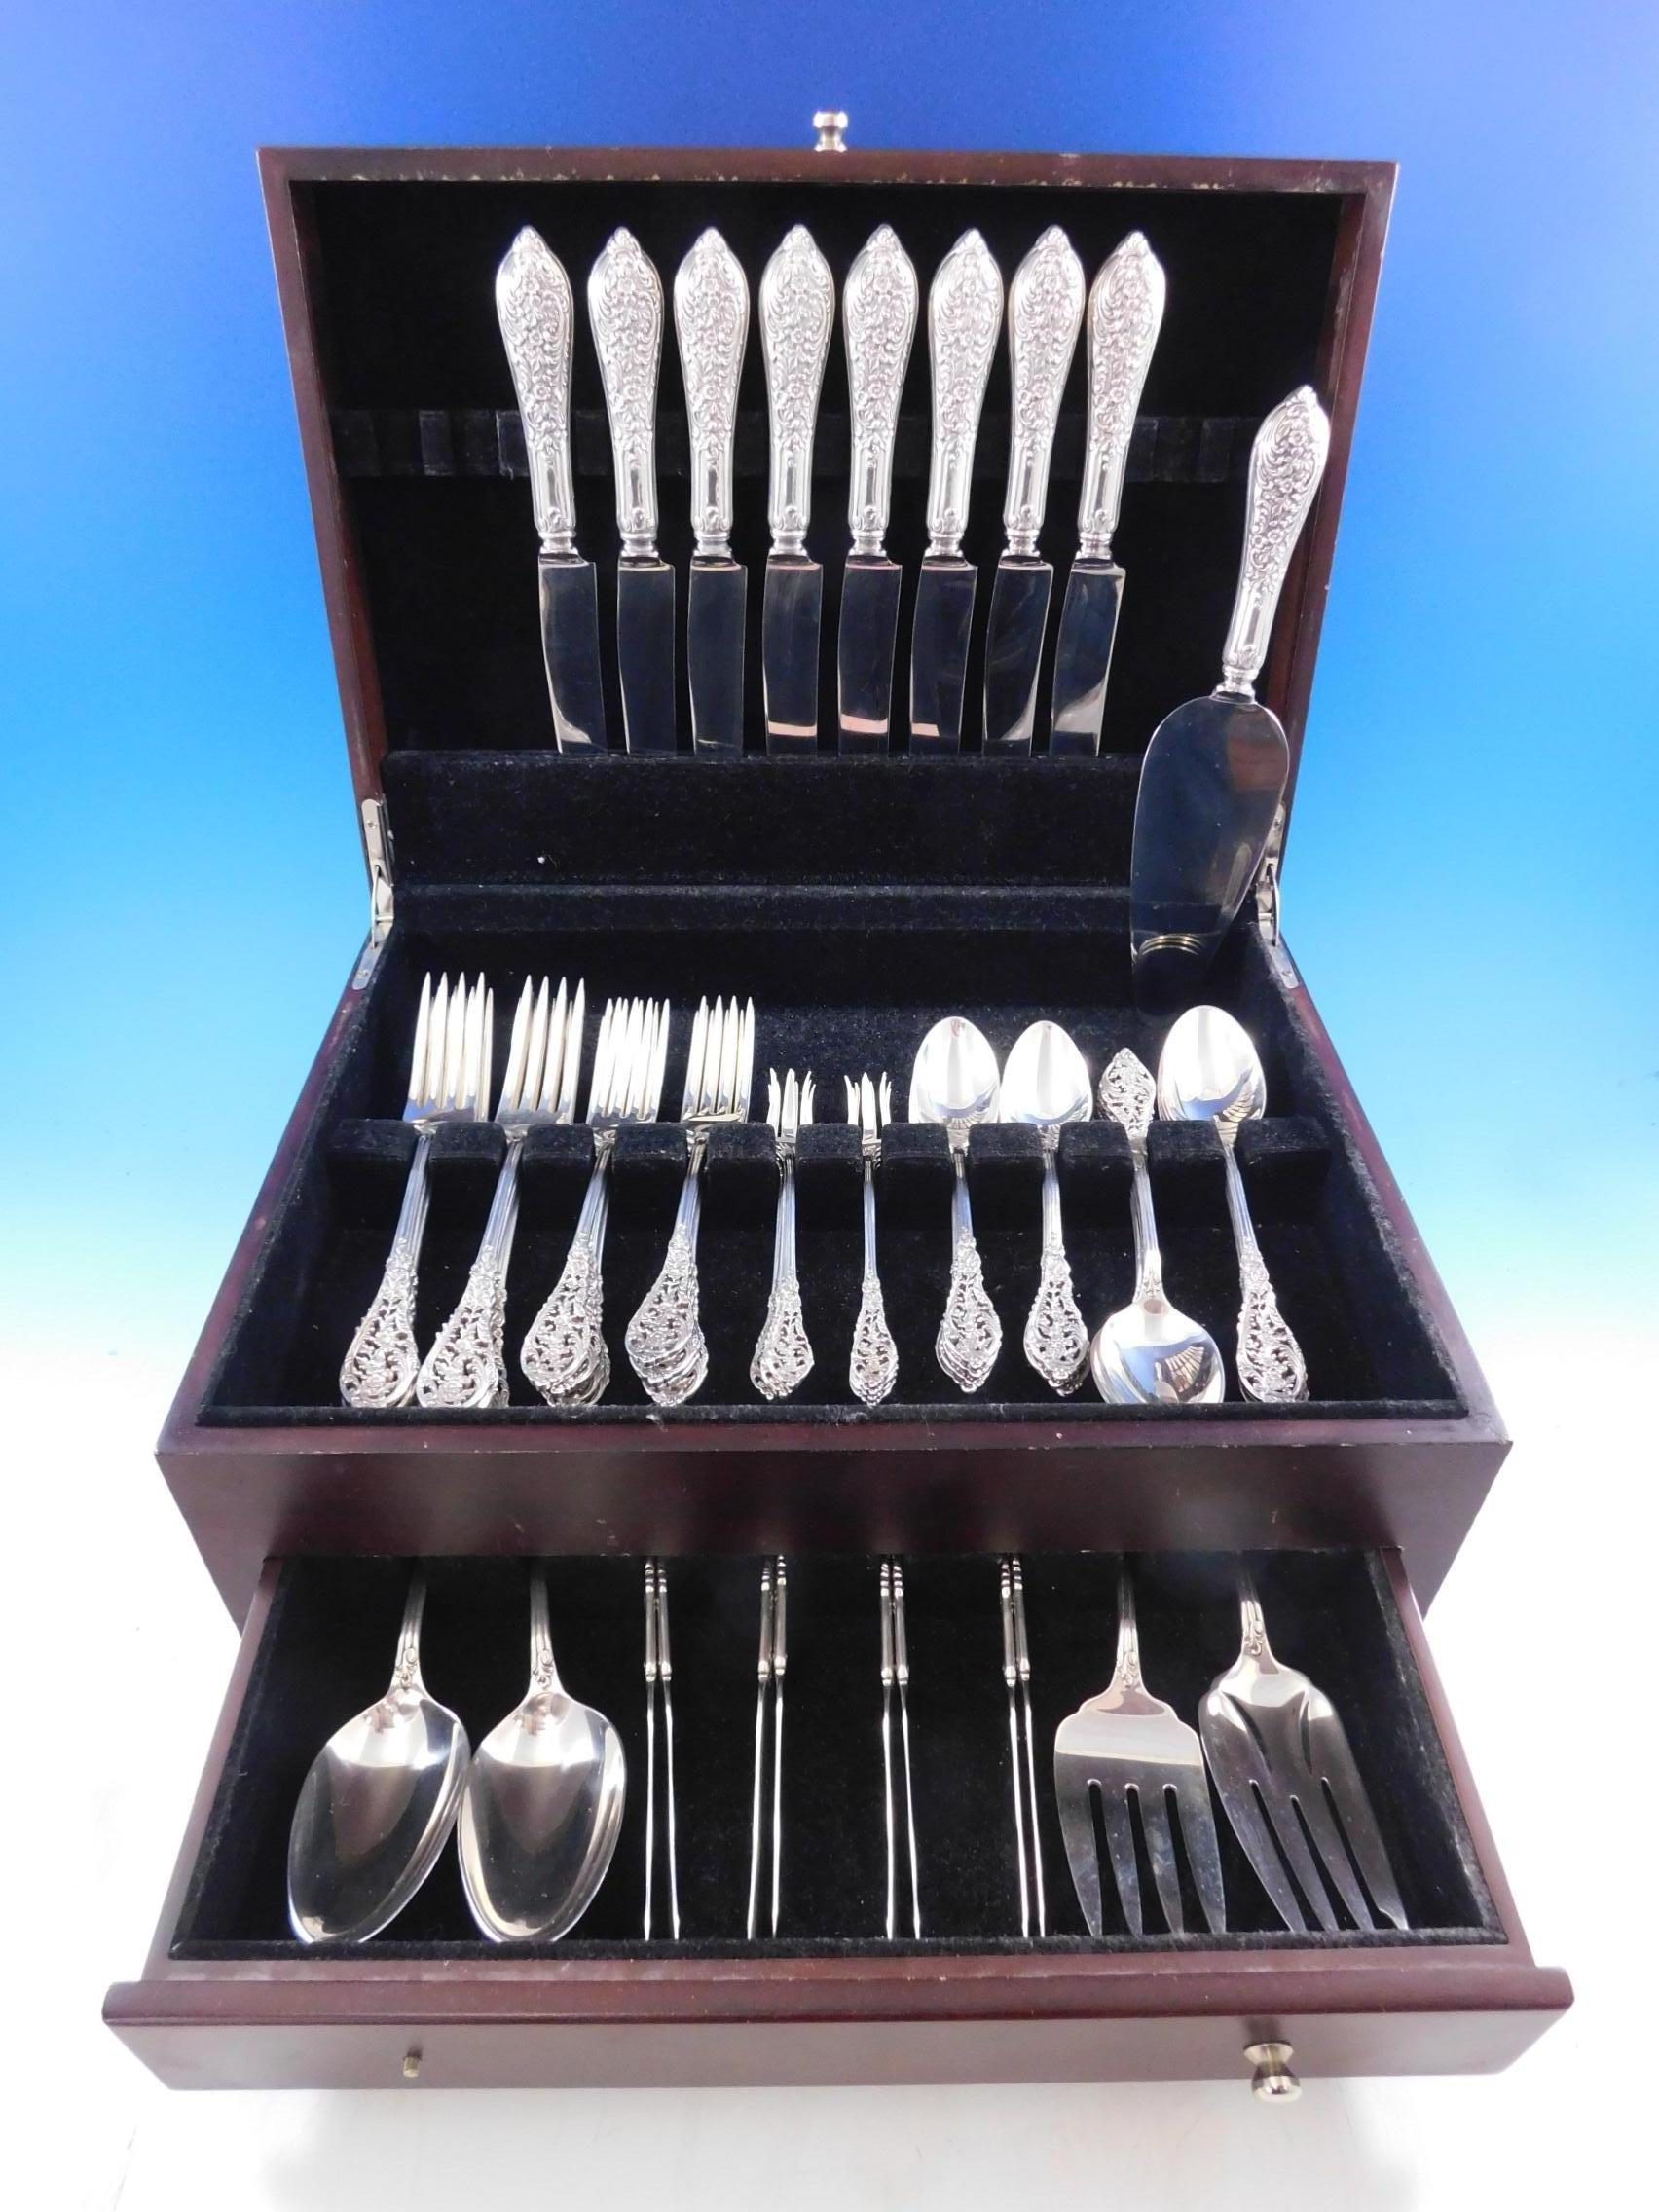 Beautiful dinner size trianon pierced by Dominick and Haff flatware set, 61 pieces. This set includes:

8 dinner knives 9 3/4